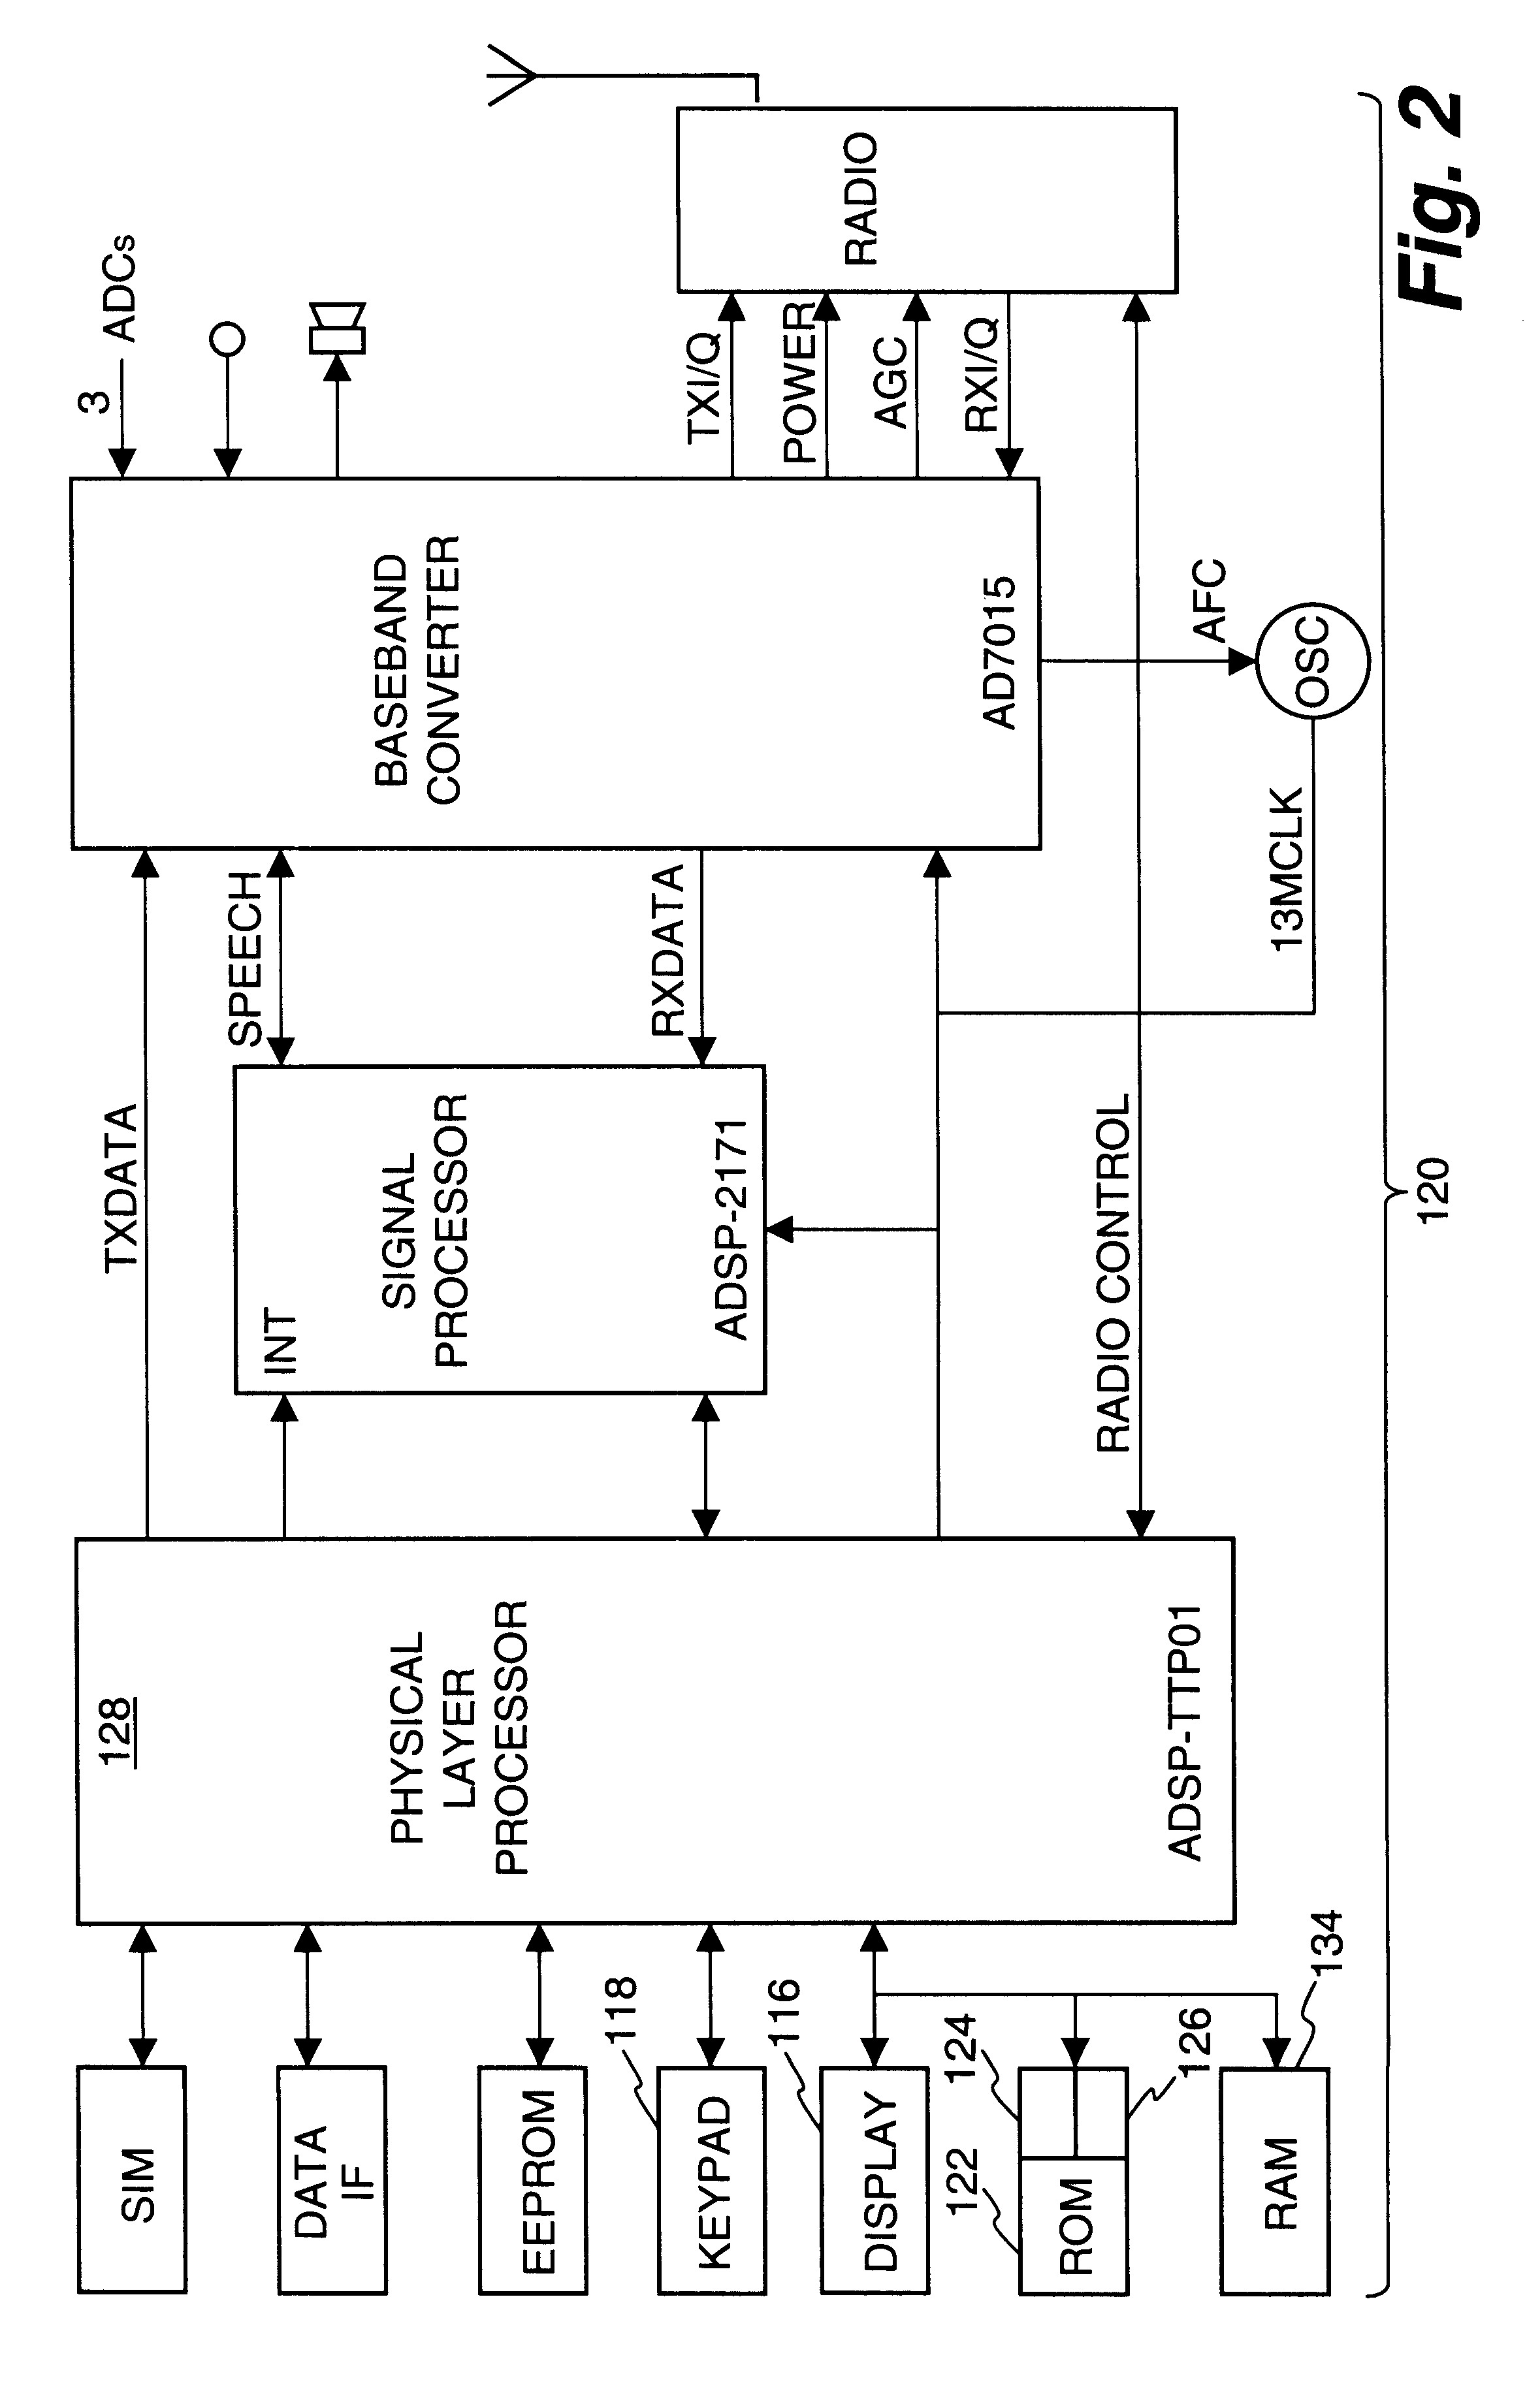 Method and apparatus for conducting crypto-ignition processes between thin client devices and server devices over data networks